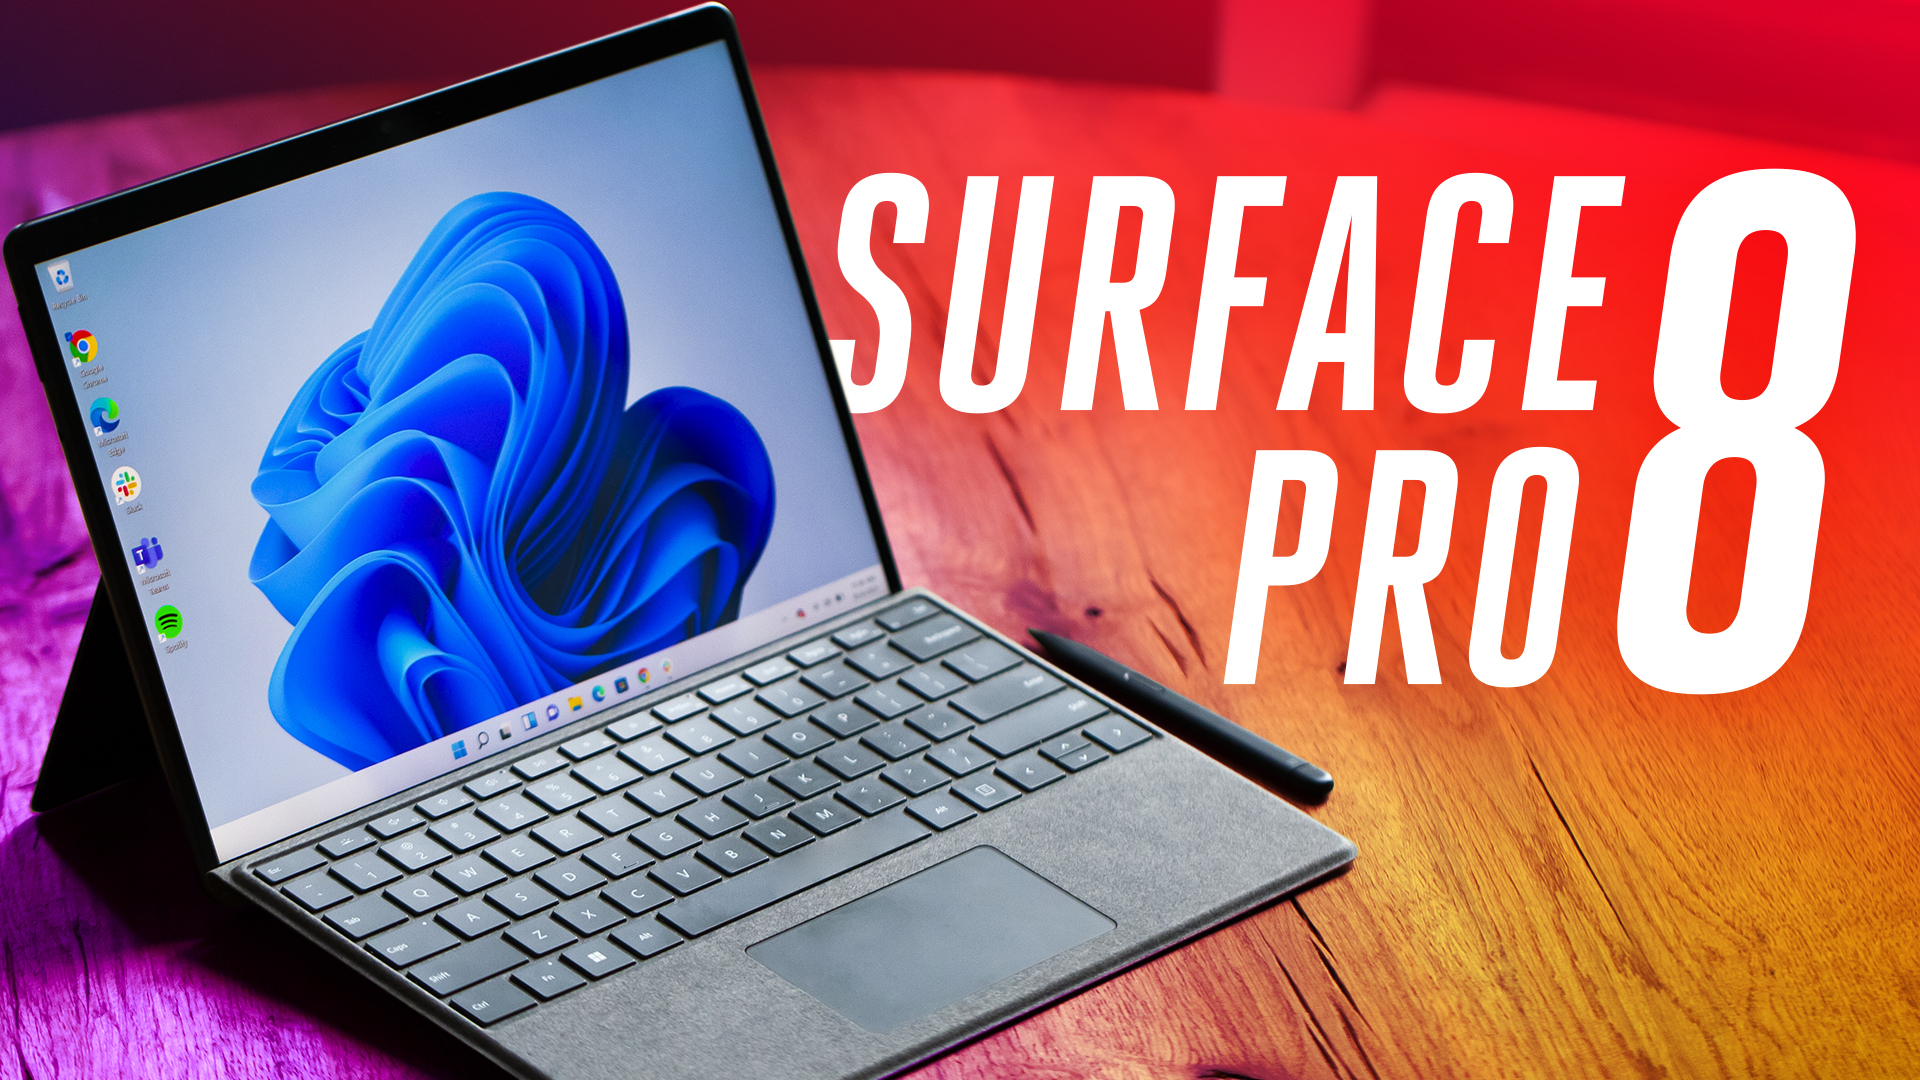 How to choose between the Surface Pro X and Surface Pro 7 - The Verge